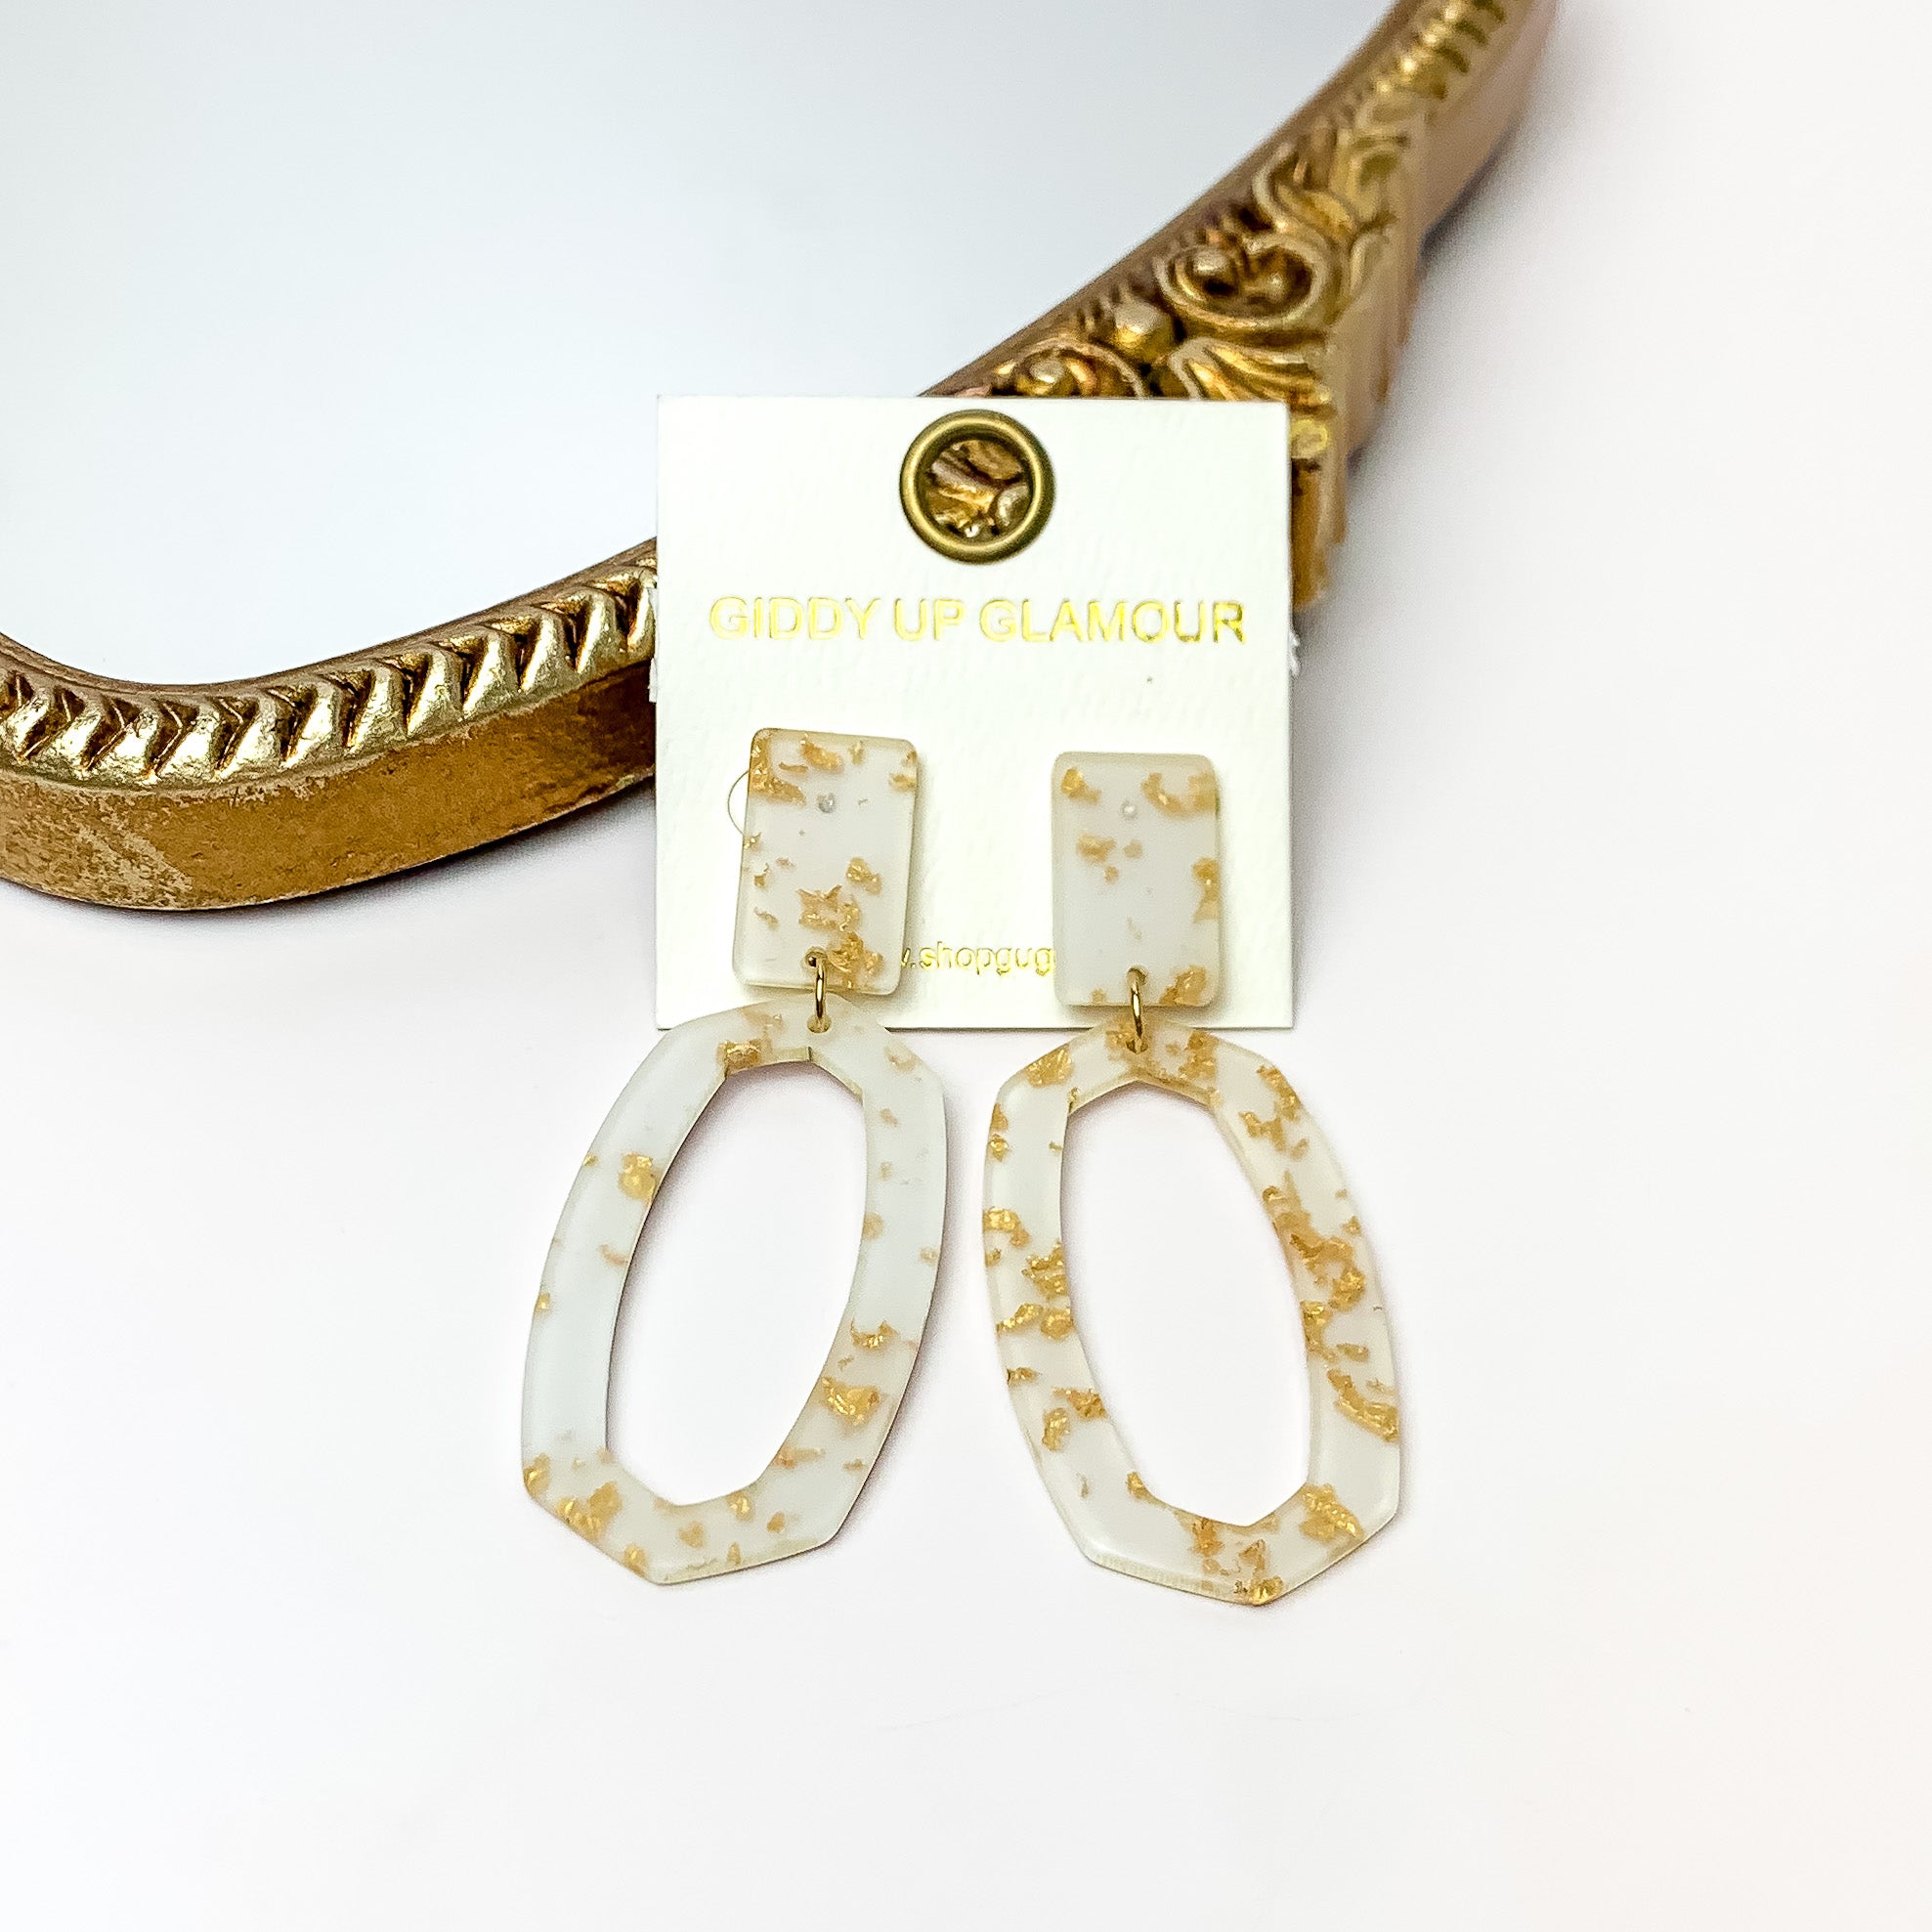 Miami Marble Open Oval Earrings in Cream and Gold. Pictured on a white background with the earrings against a gold frame.